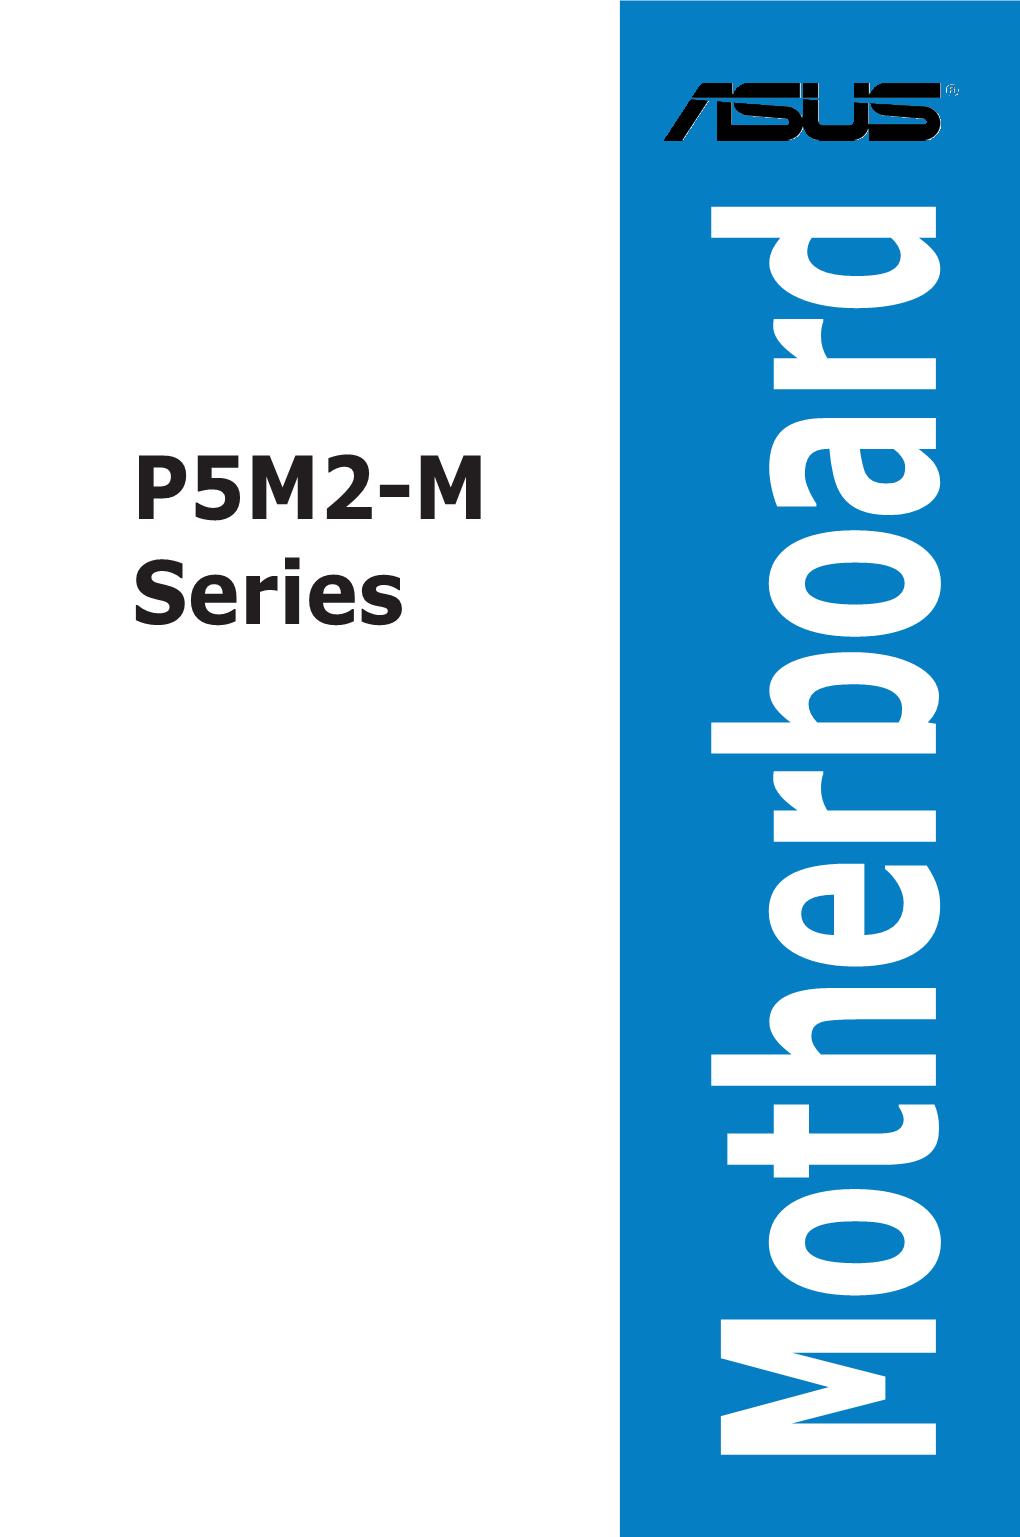 P5M2-M Series Specifications Summary